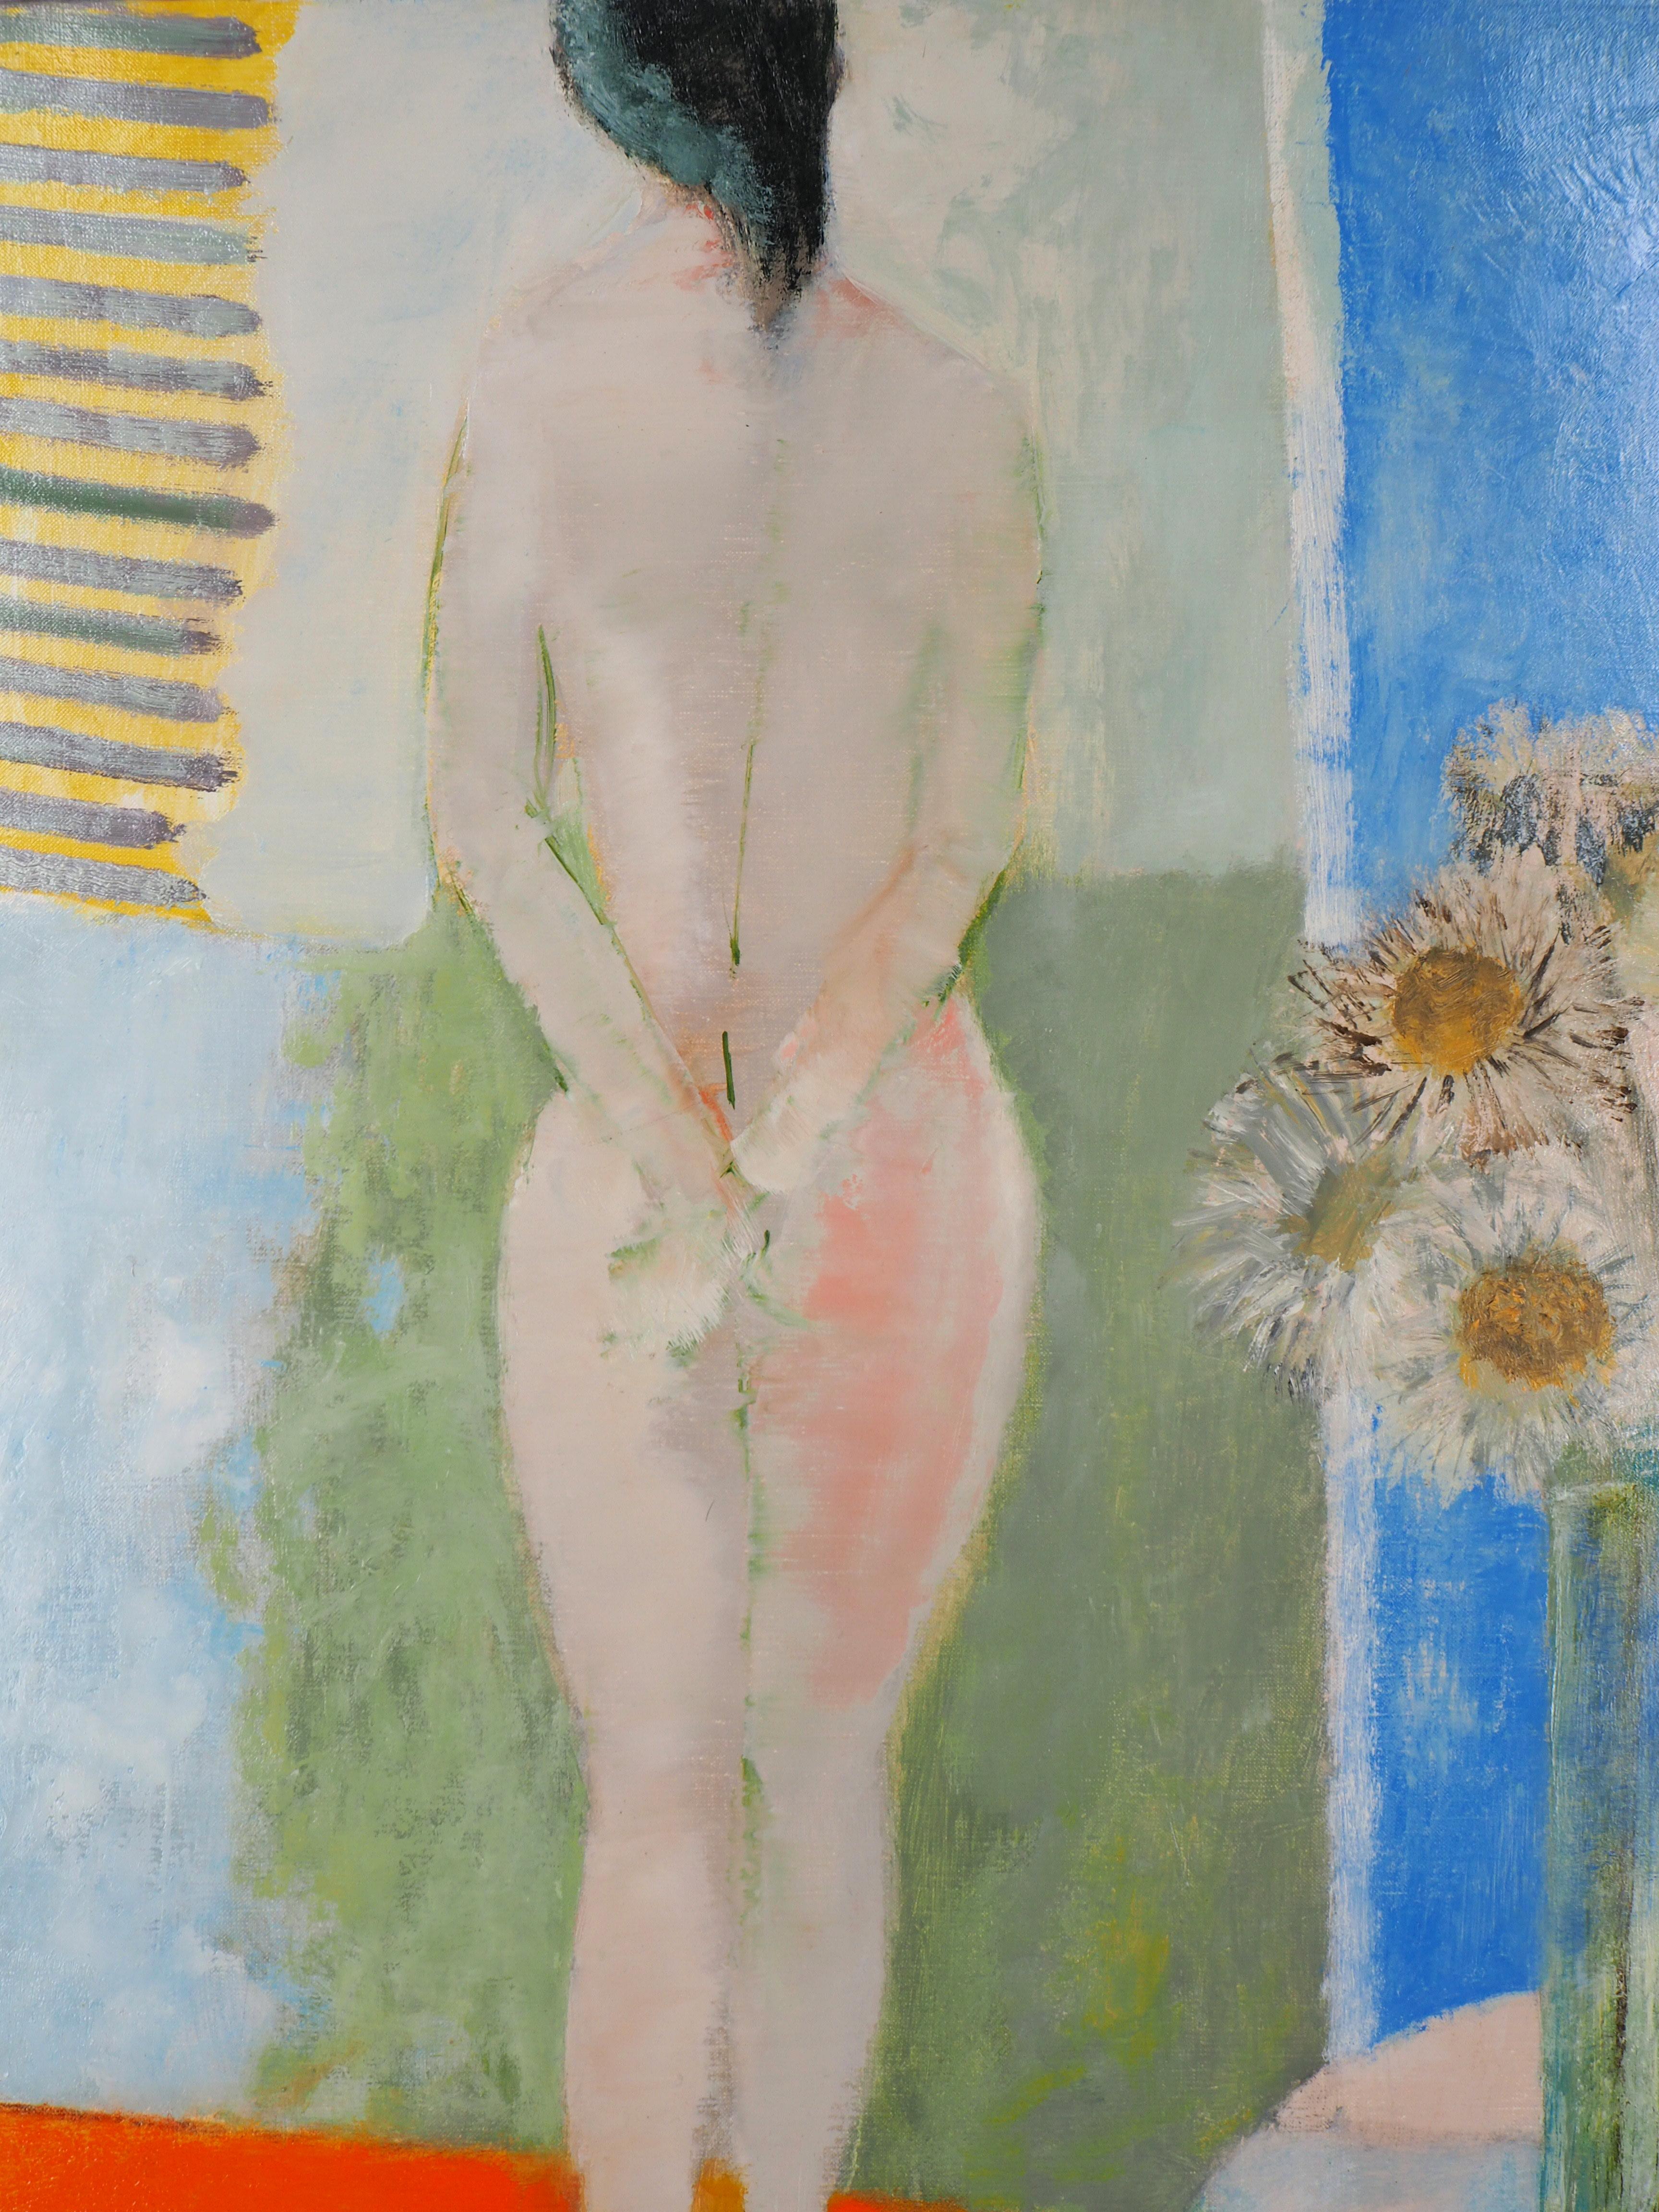 Interior : Model with Thistles - Original Oil on Canvas, Handsigned - Modern Painting by Guy Bardone